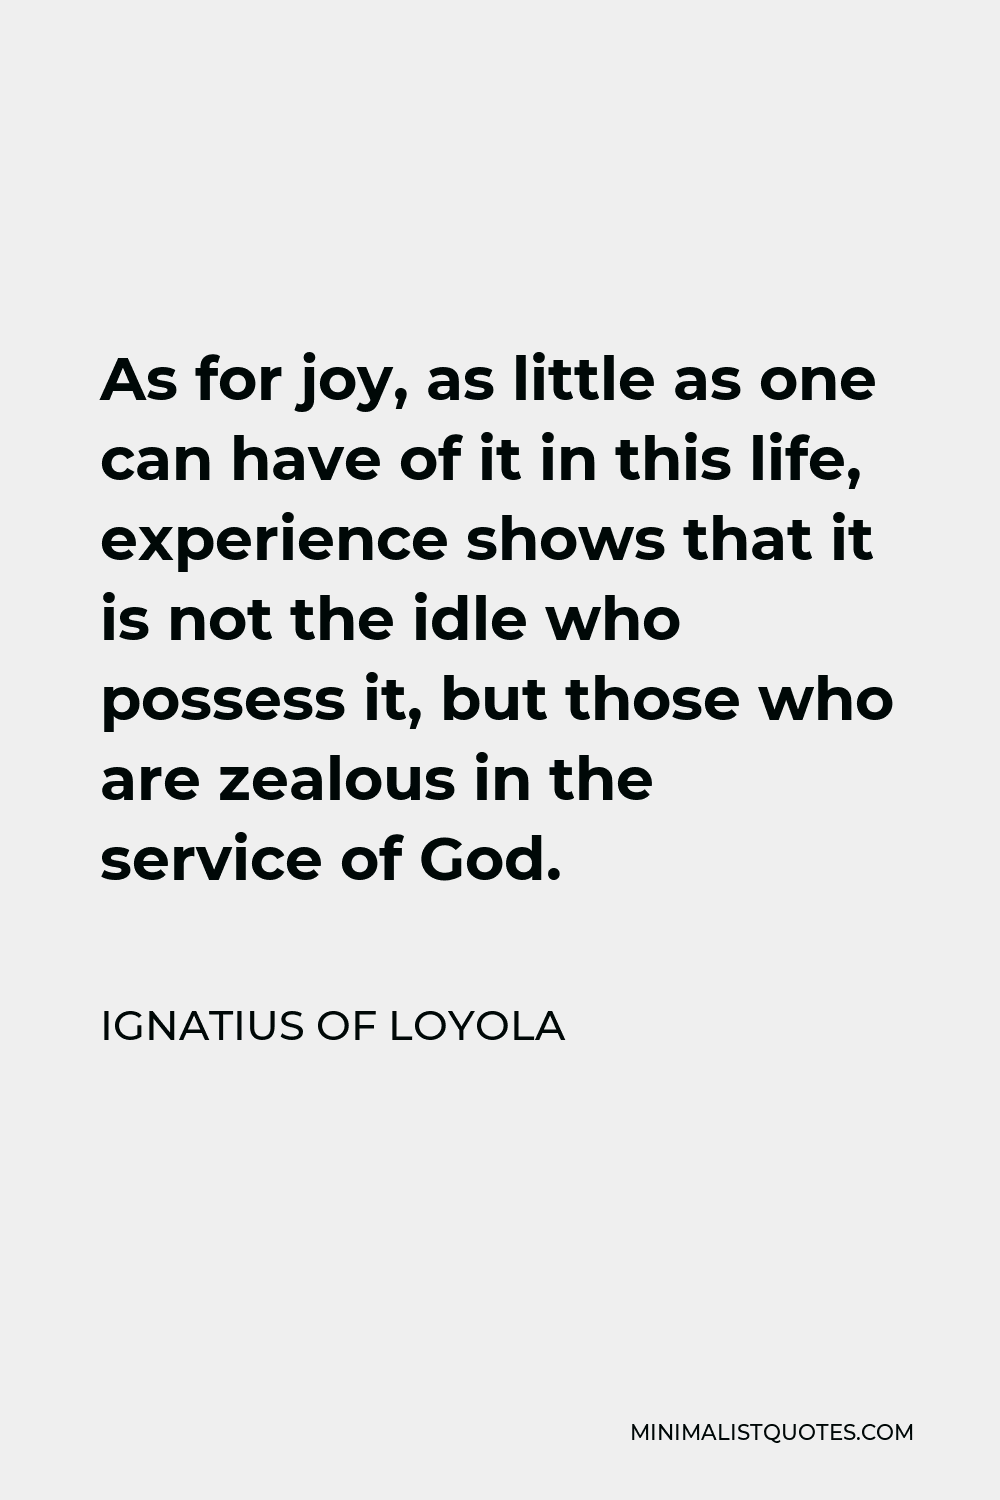 Ignatius of Loyola Quote - As for joy, as little as one can have of it in this life, experience shows that it is not the idle who possess it, but those who are zealous in the service of God.